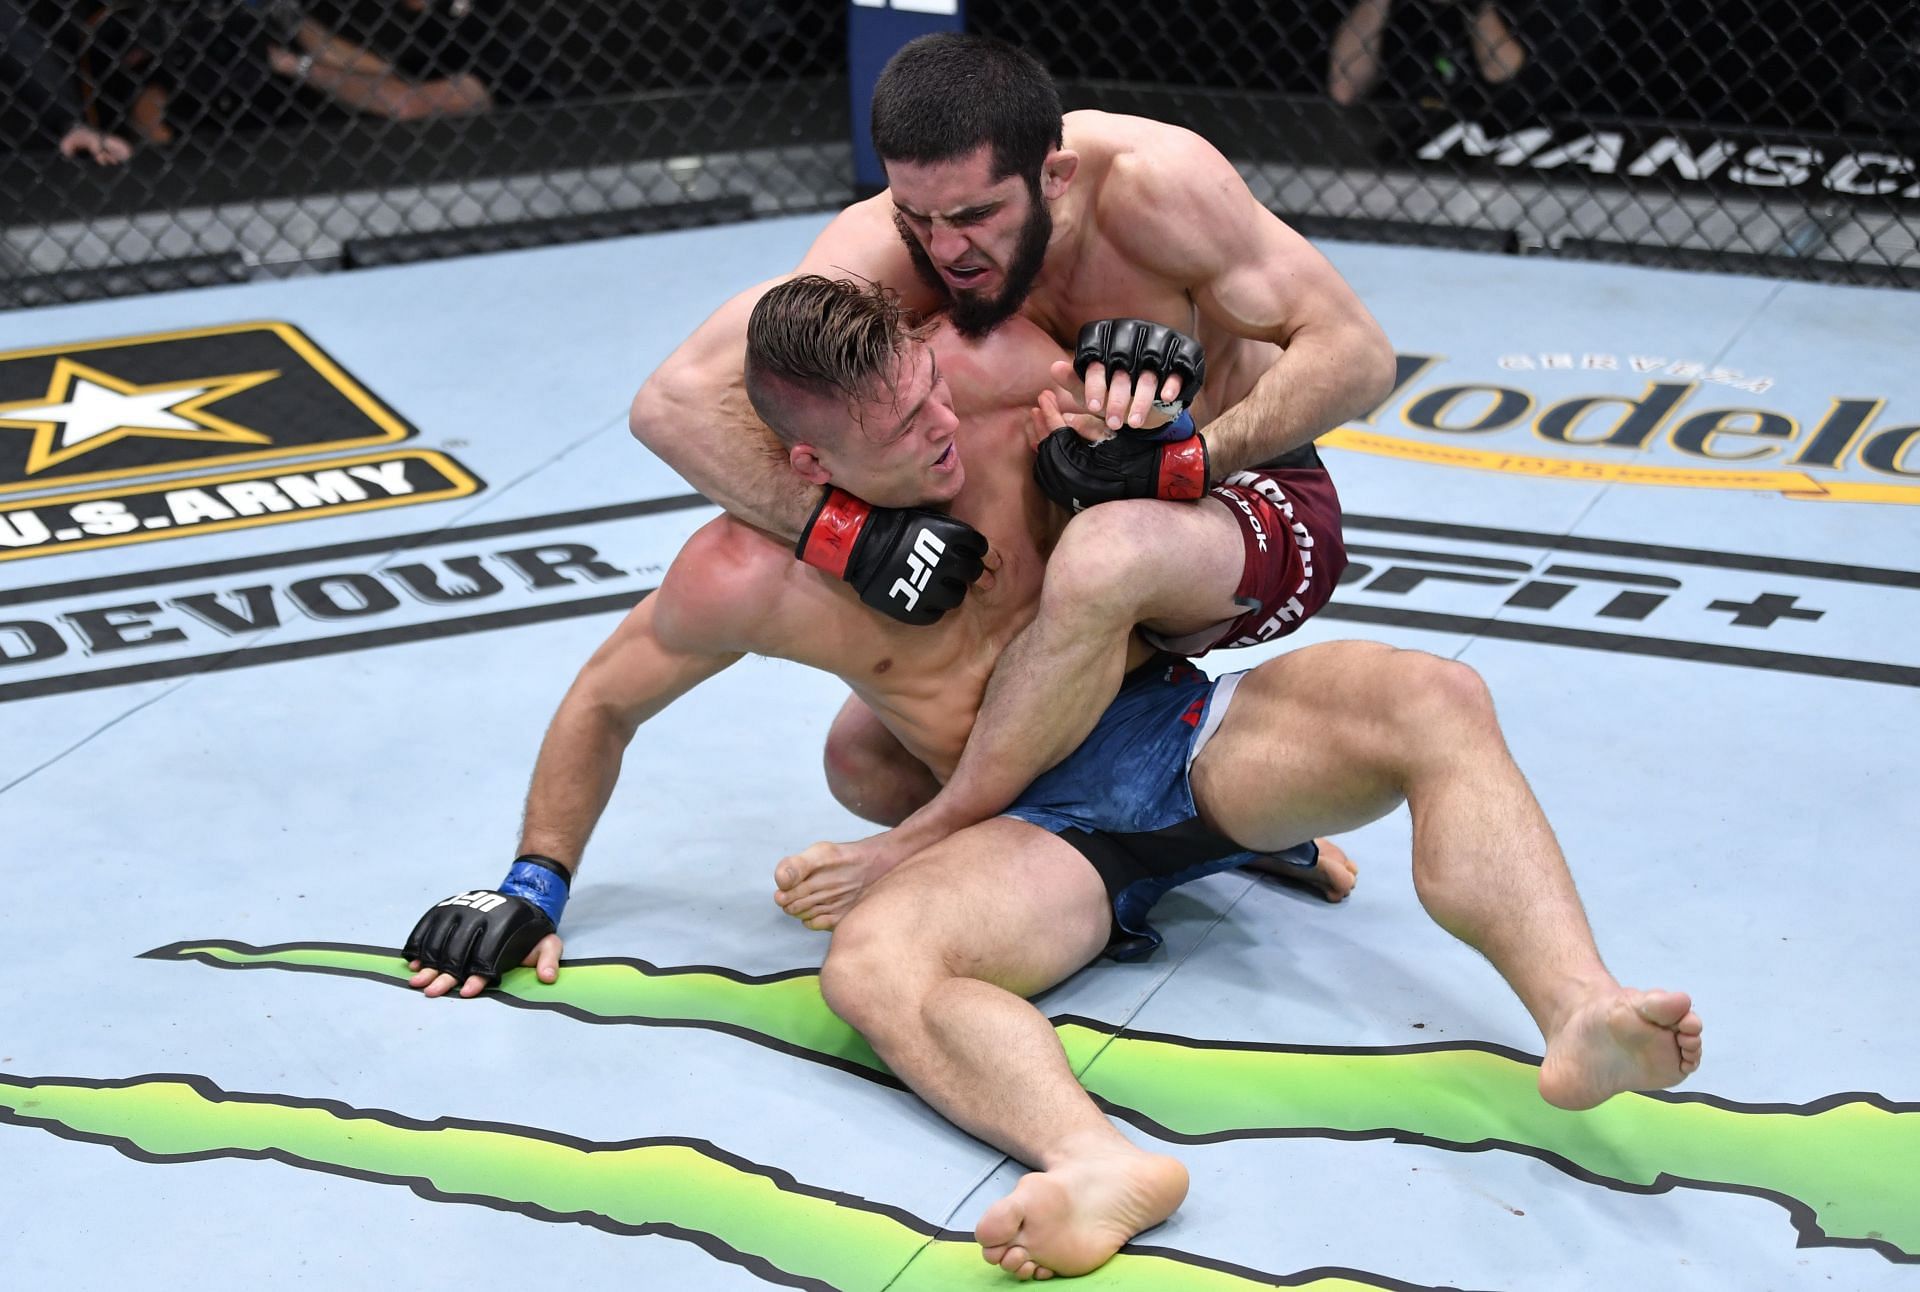 Islam Makhachev has 10 career wins via submission